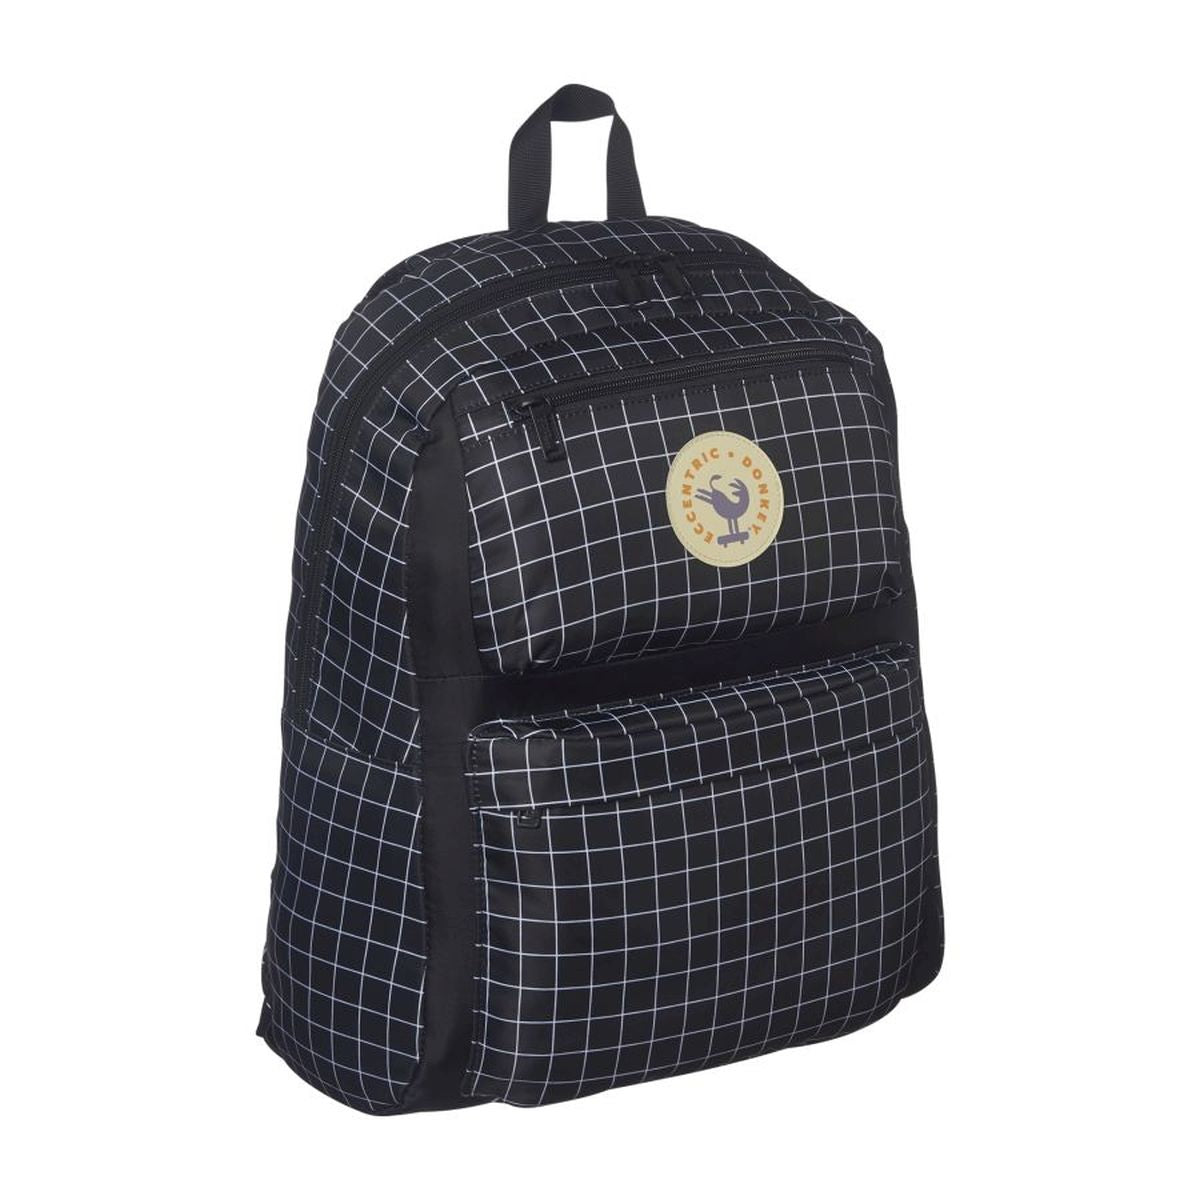 Backpack Poitou Trends Squares